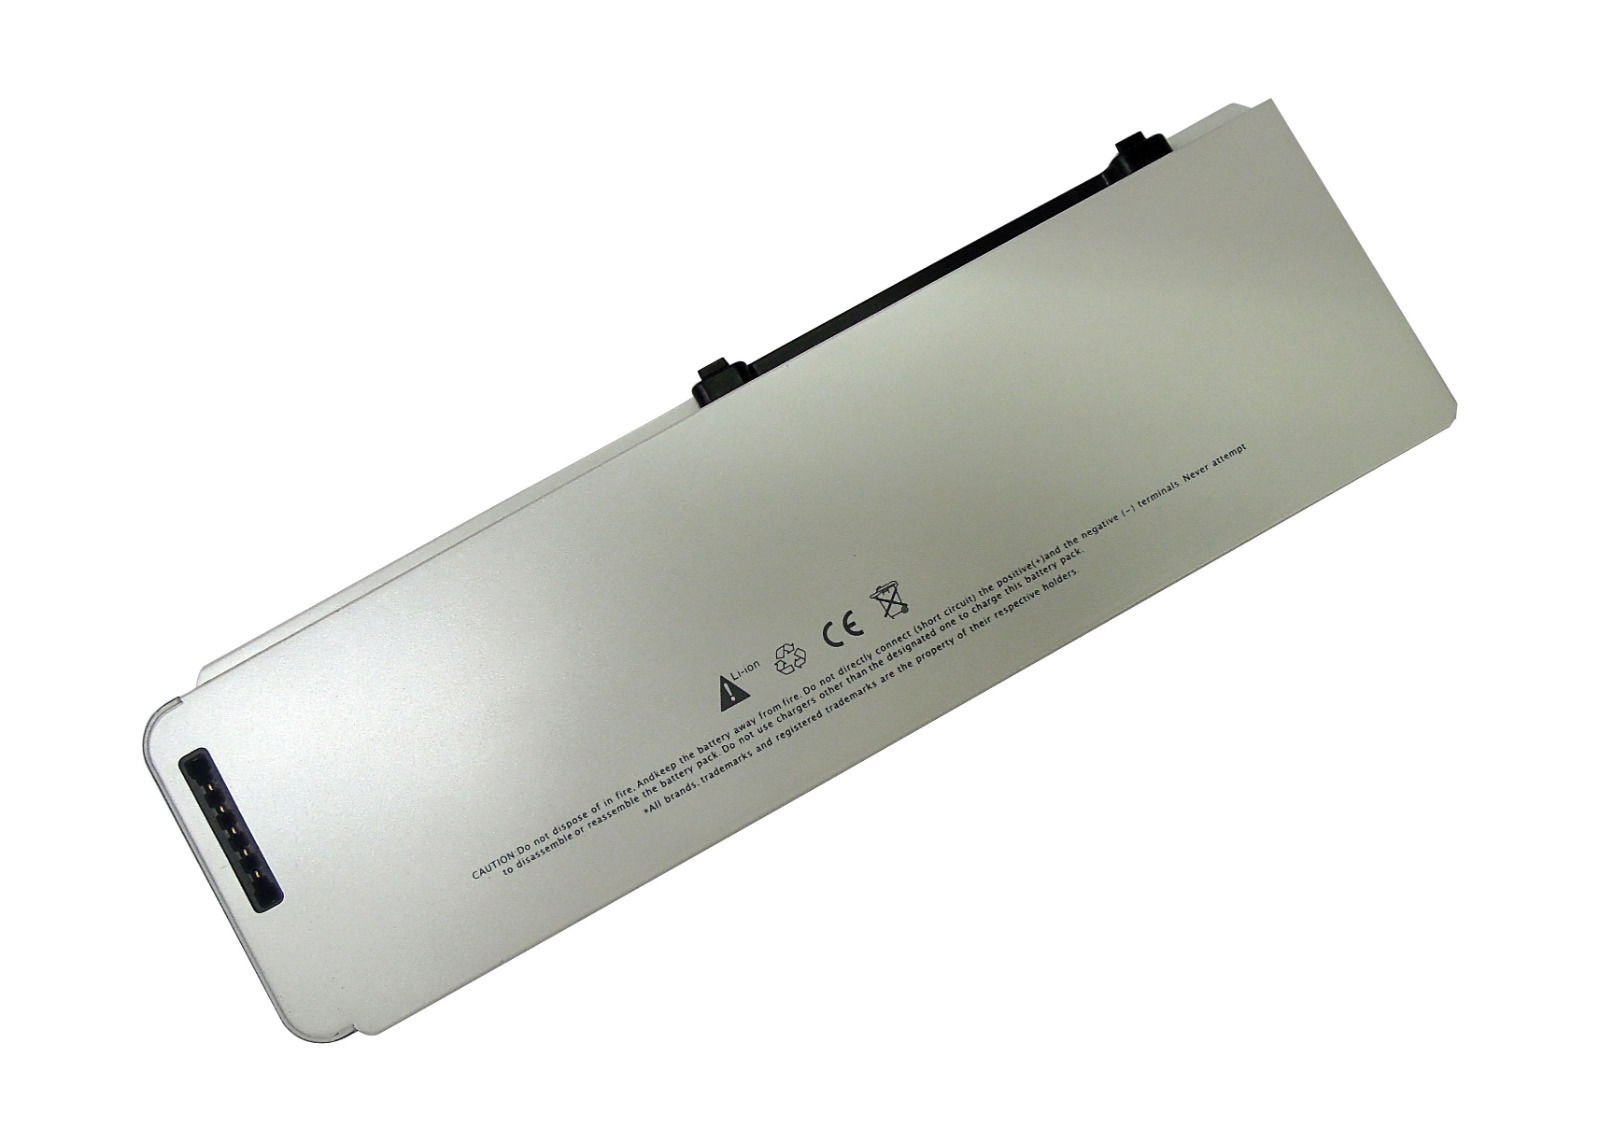 macbook pro 15 inch late 2011 battery replacement